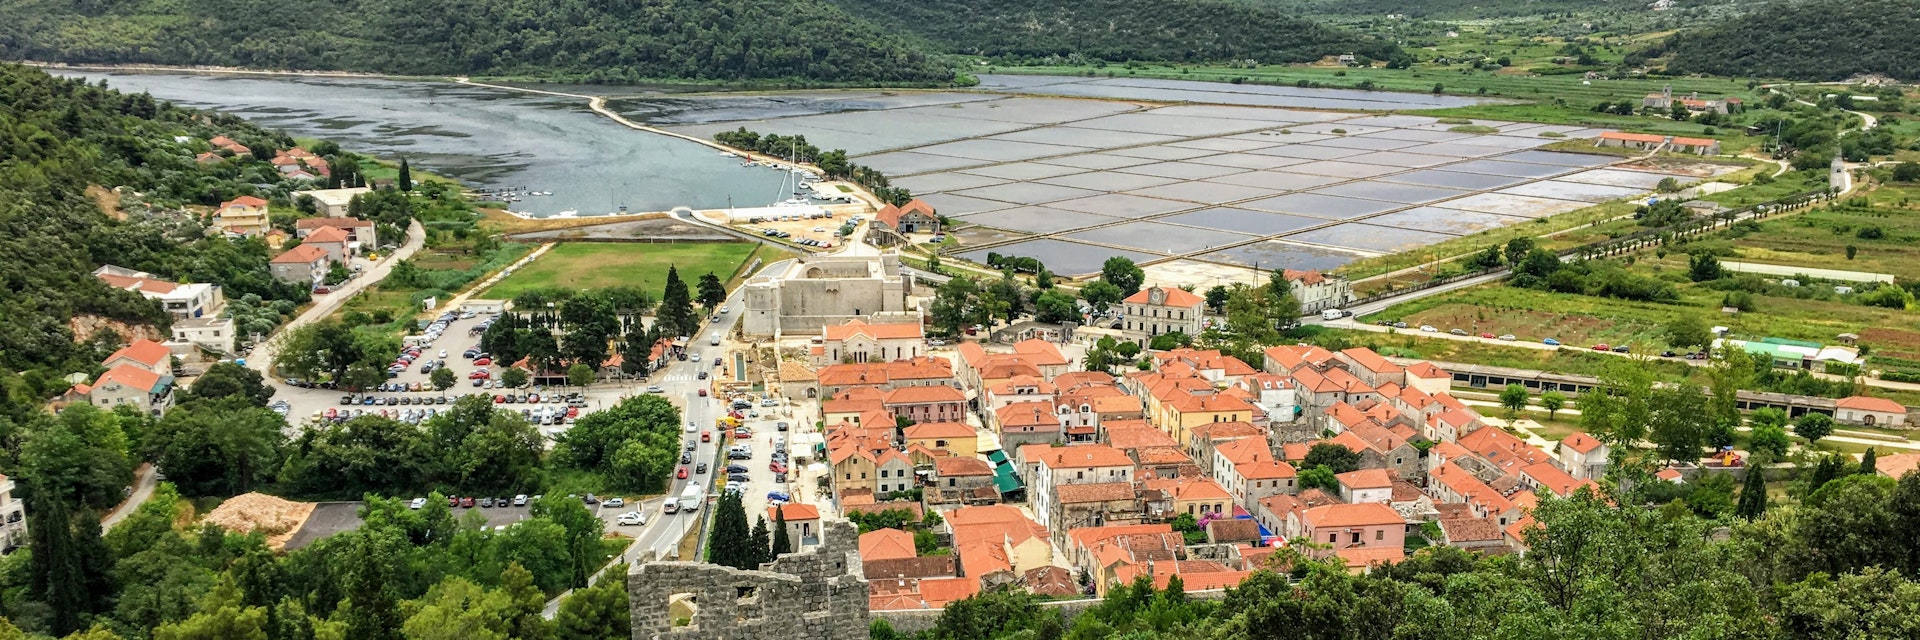 Ston, Croatia - July 9th, 2019: A group of tourists walking down along the the Walls of Ston, towards the ancient town of Ston, Croatia below.